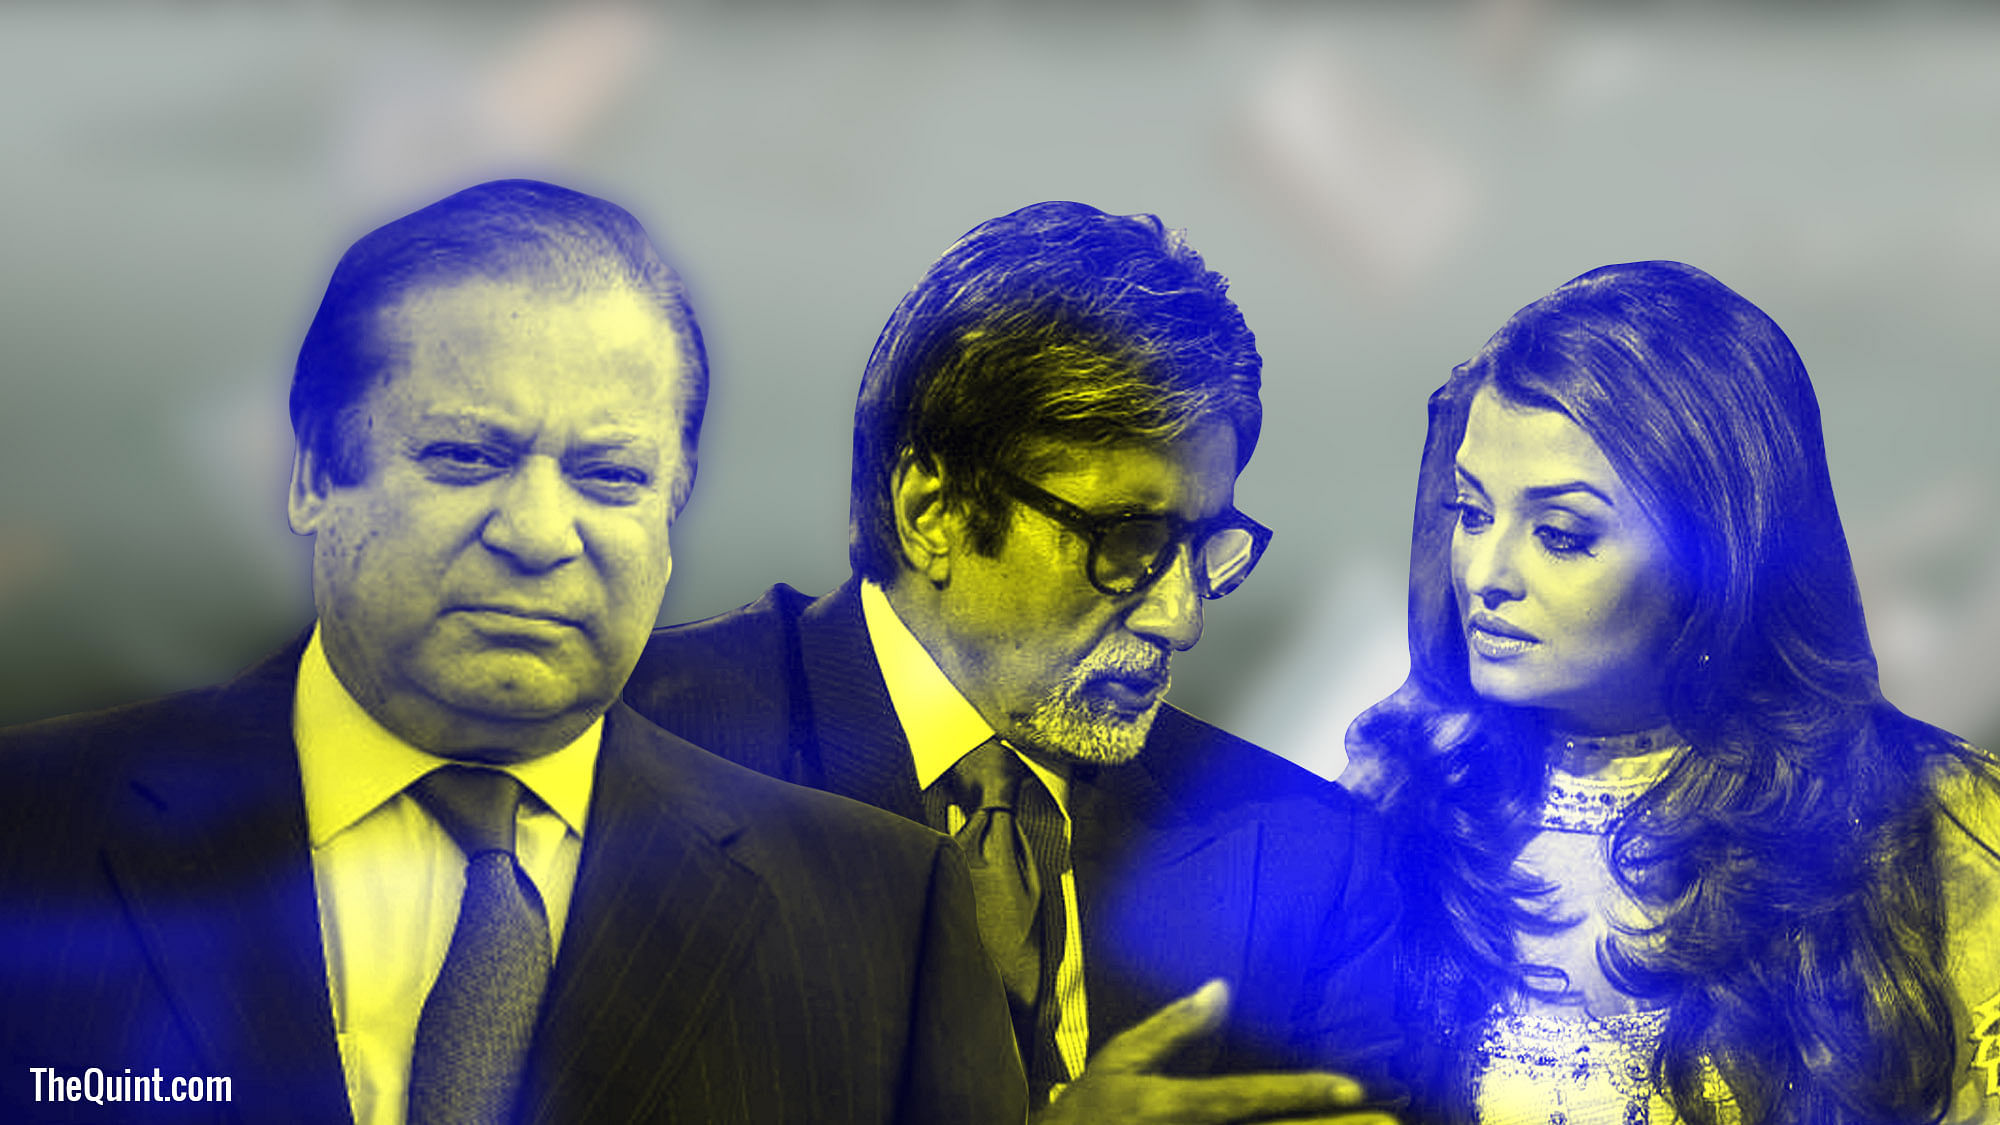 The Panama Papers case has rocked Pakistani politics. But how far has the investigation proceeded in India?